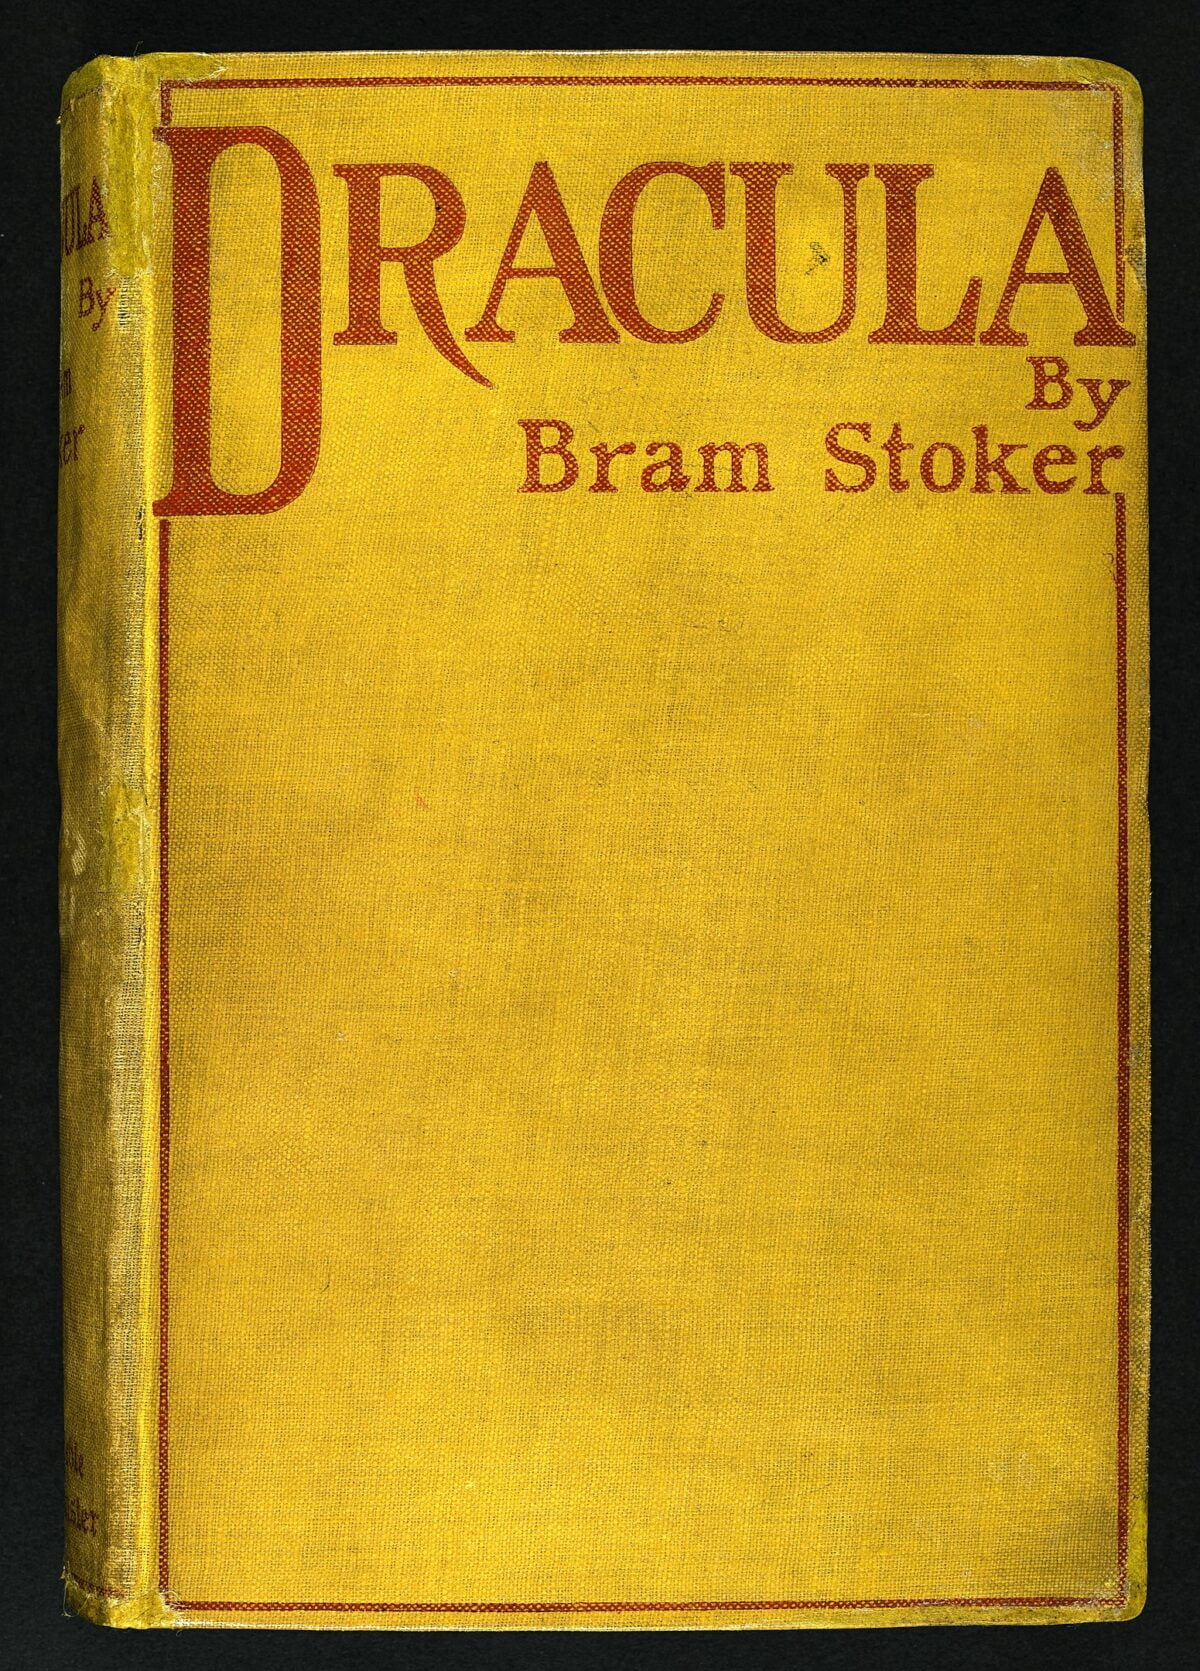 Dracula by Bram Stoker First Edition 1897